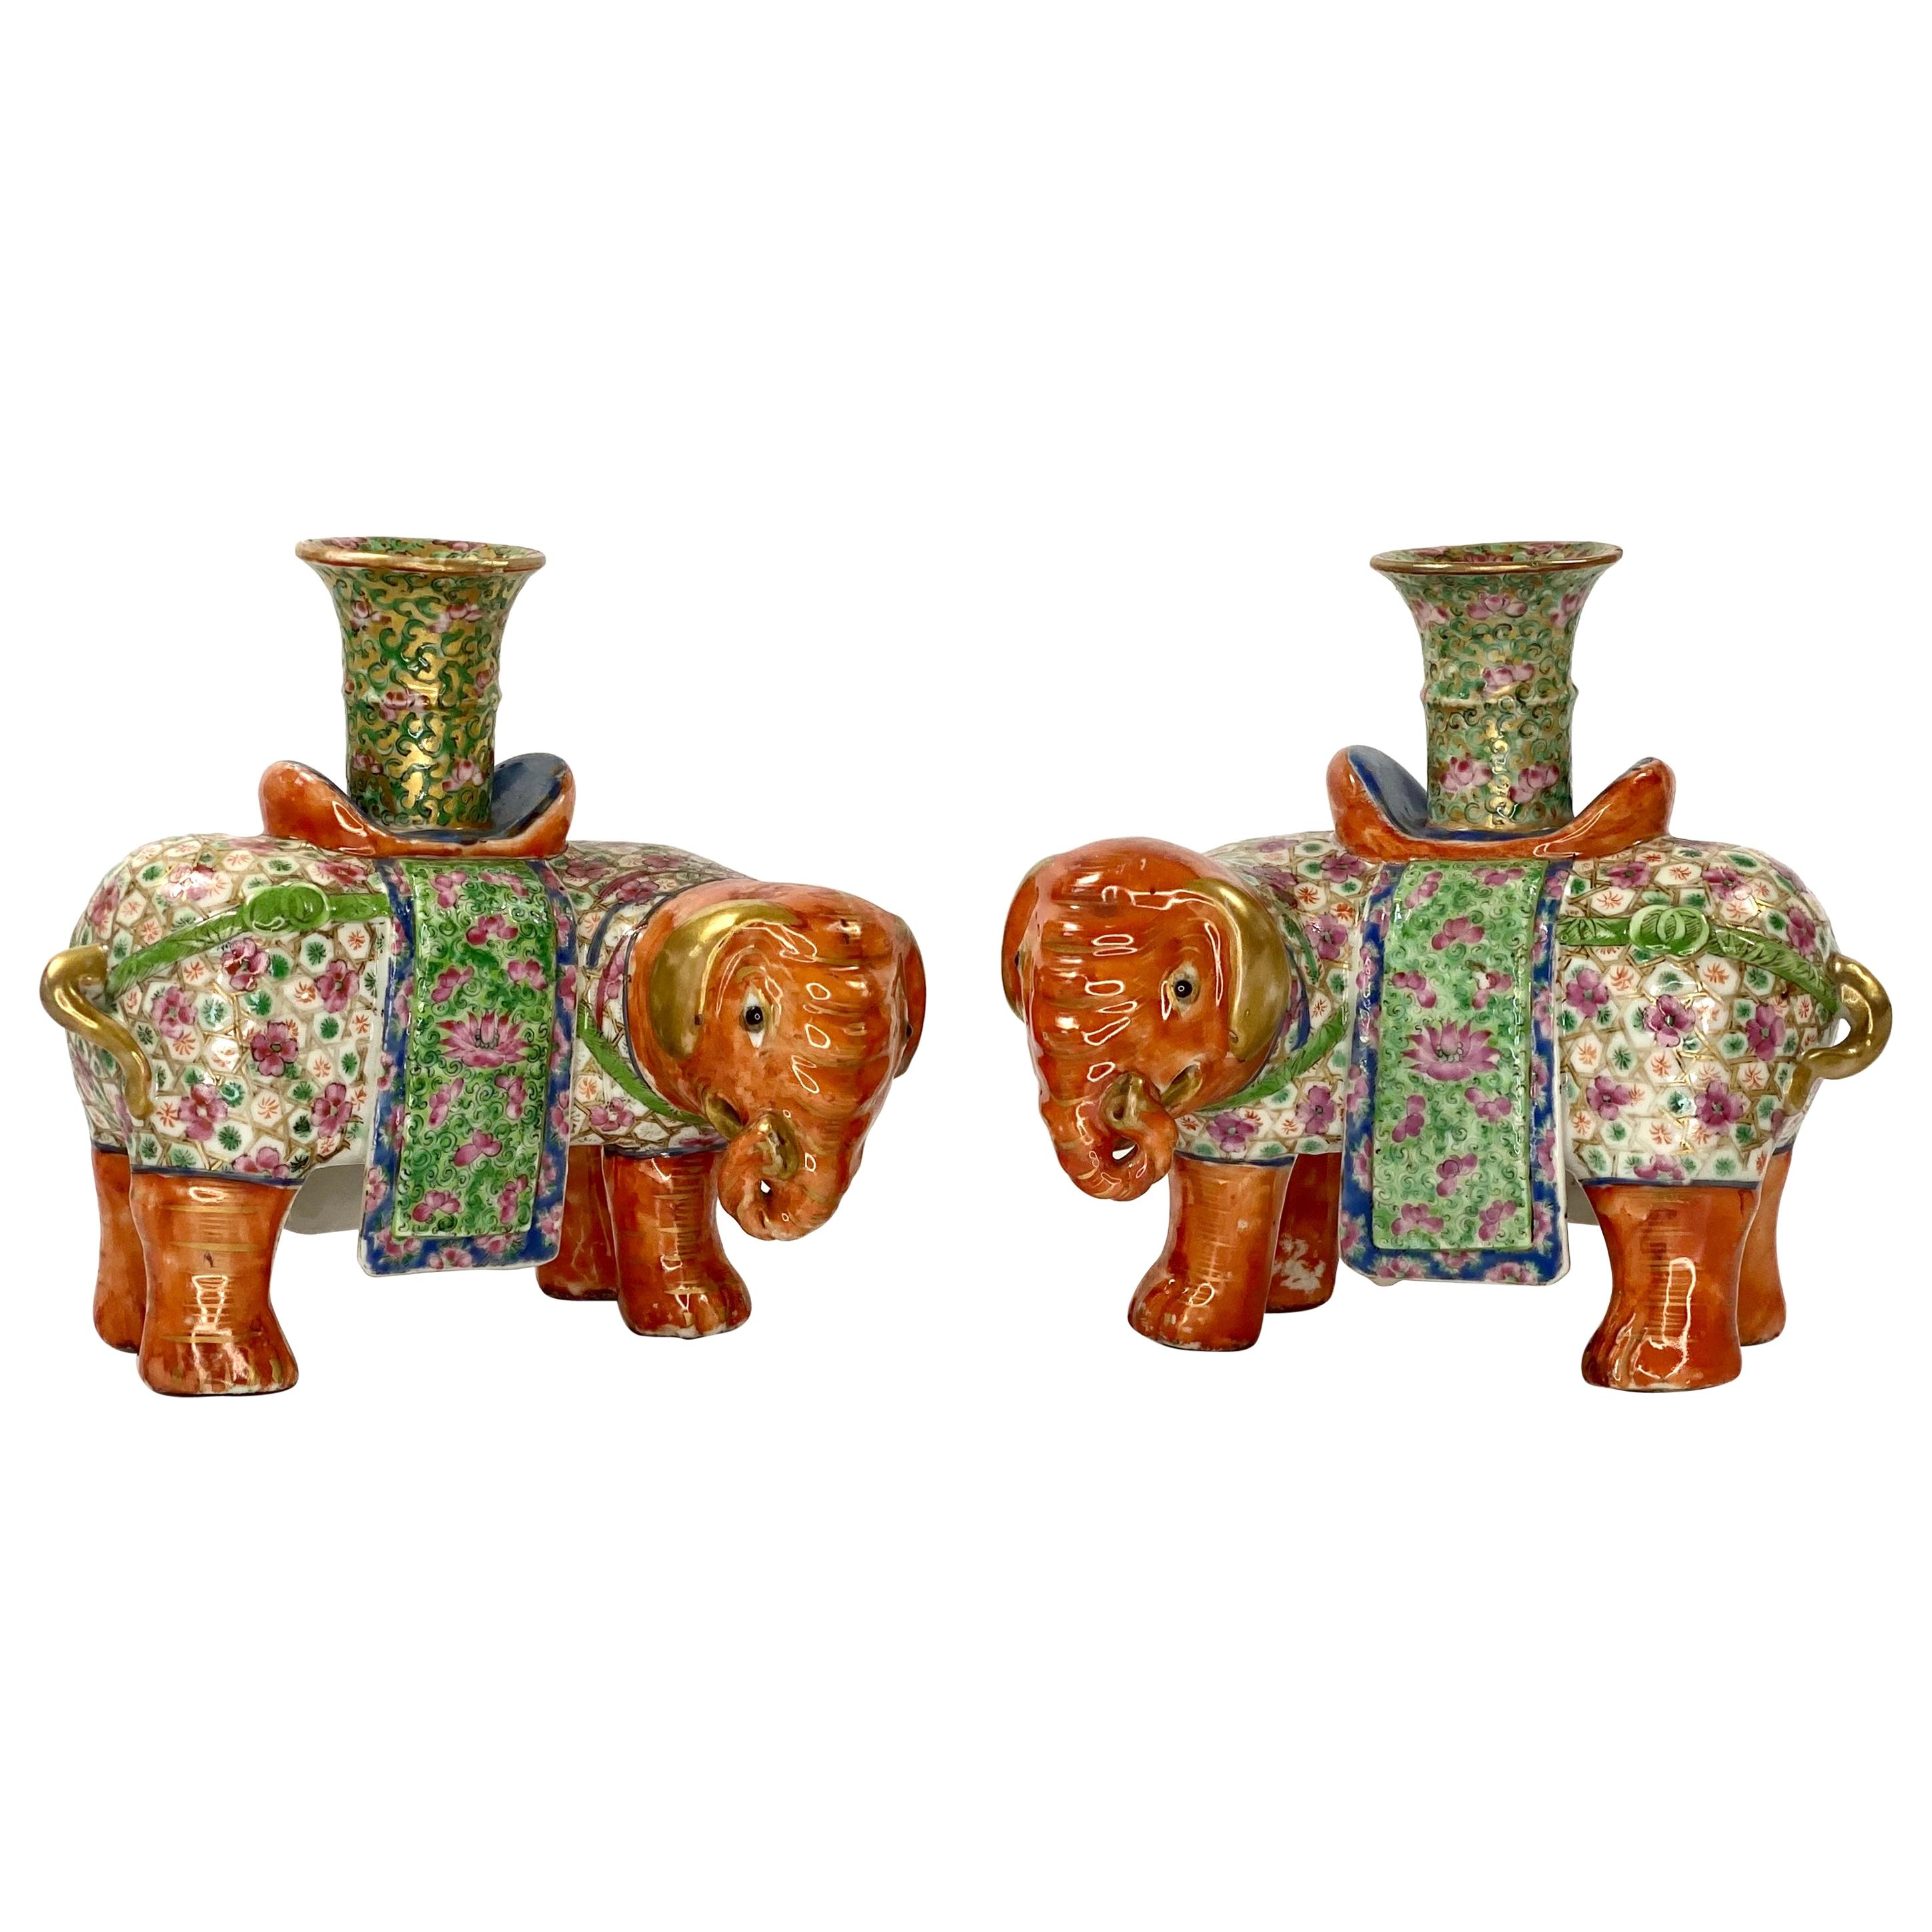 Pair of Chinese Porcelain Elephant Joss Stick Holders, circa 1850, Qing Dynasty